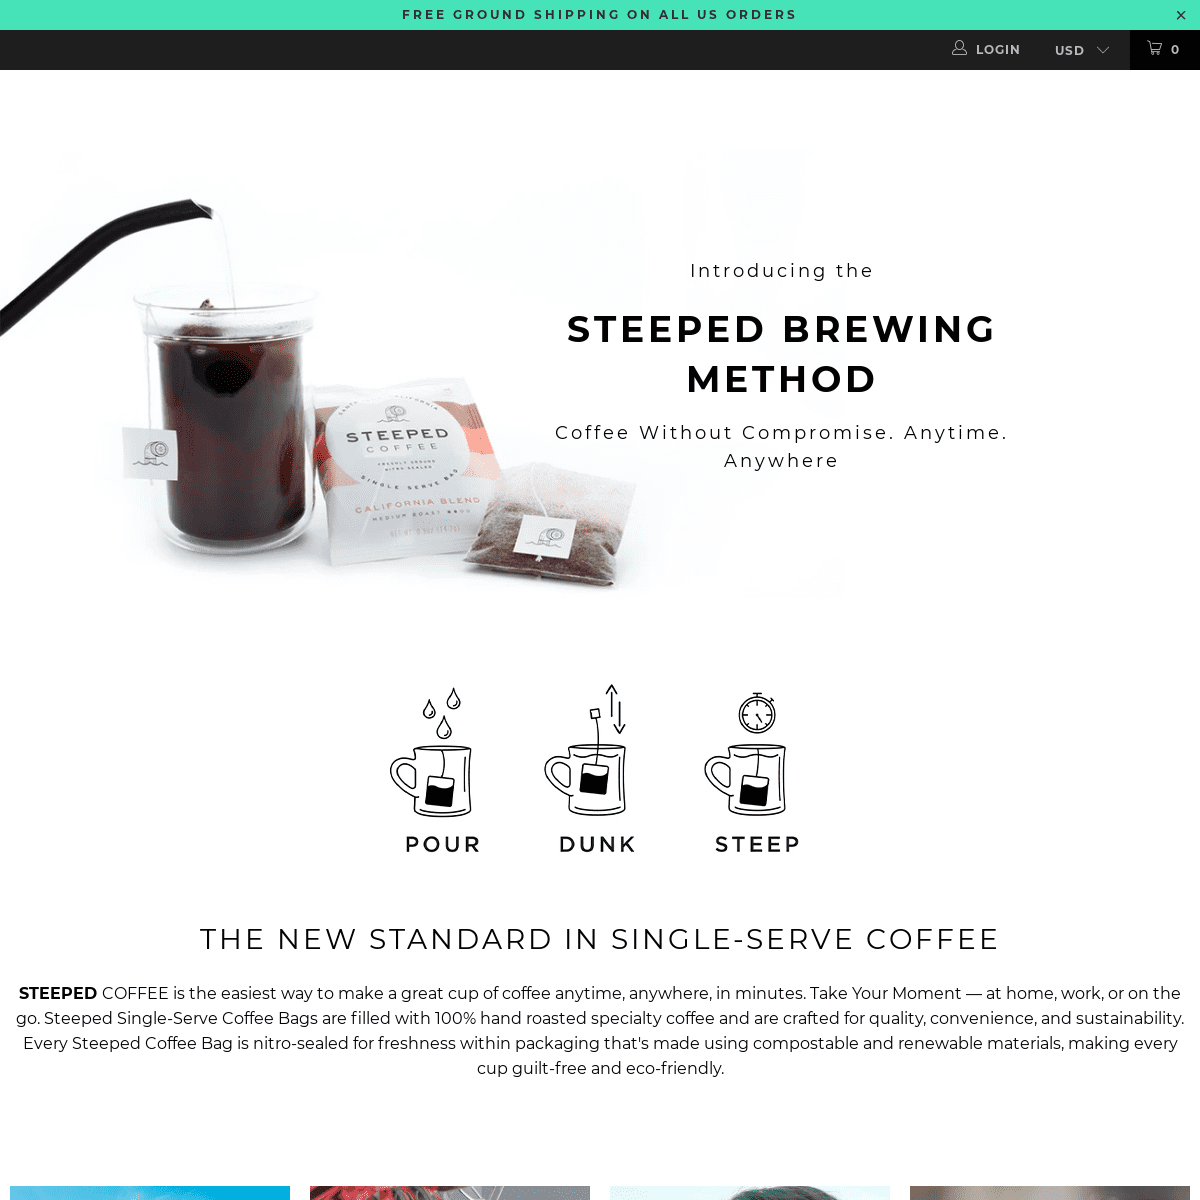 A complete backup of https://steepedcoffee.com